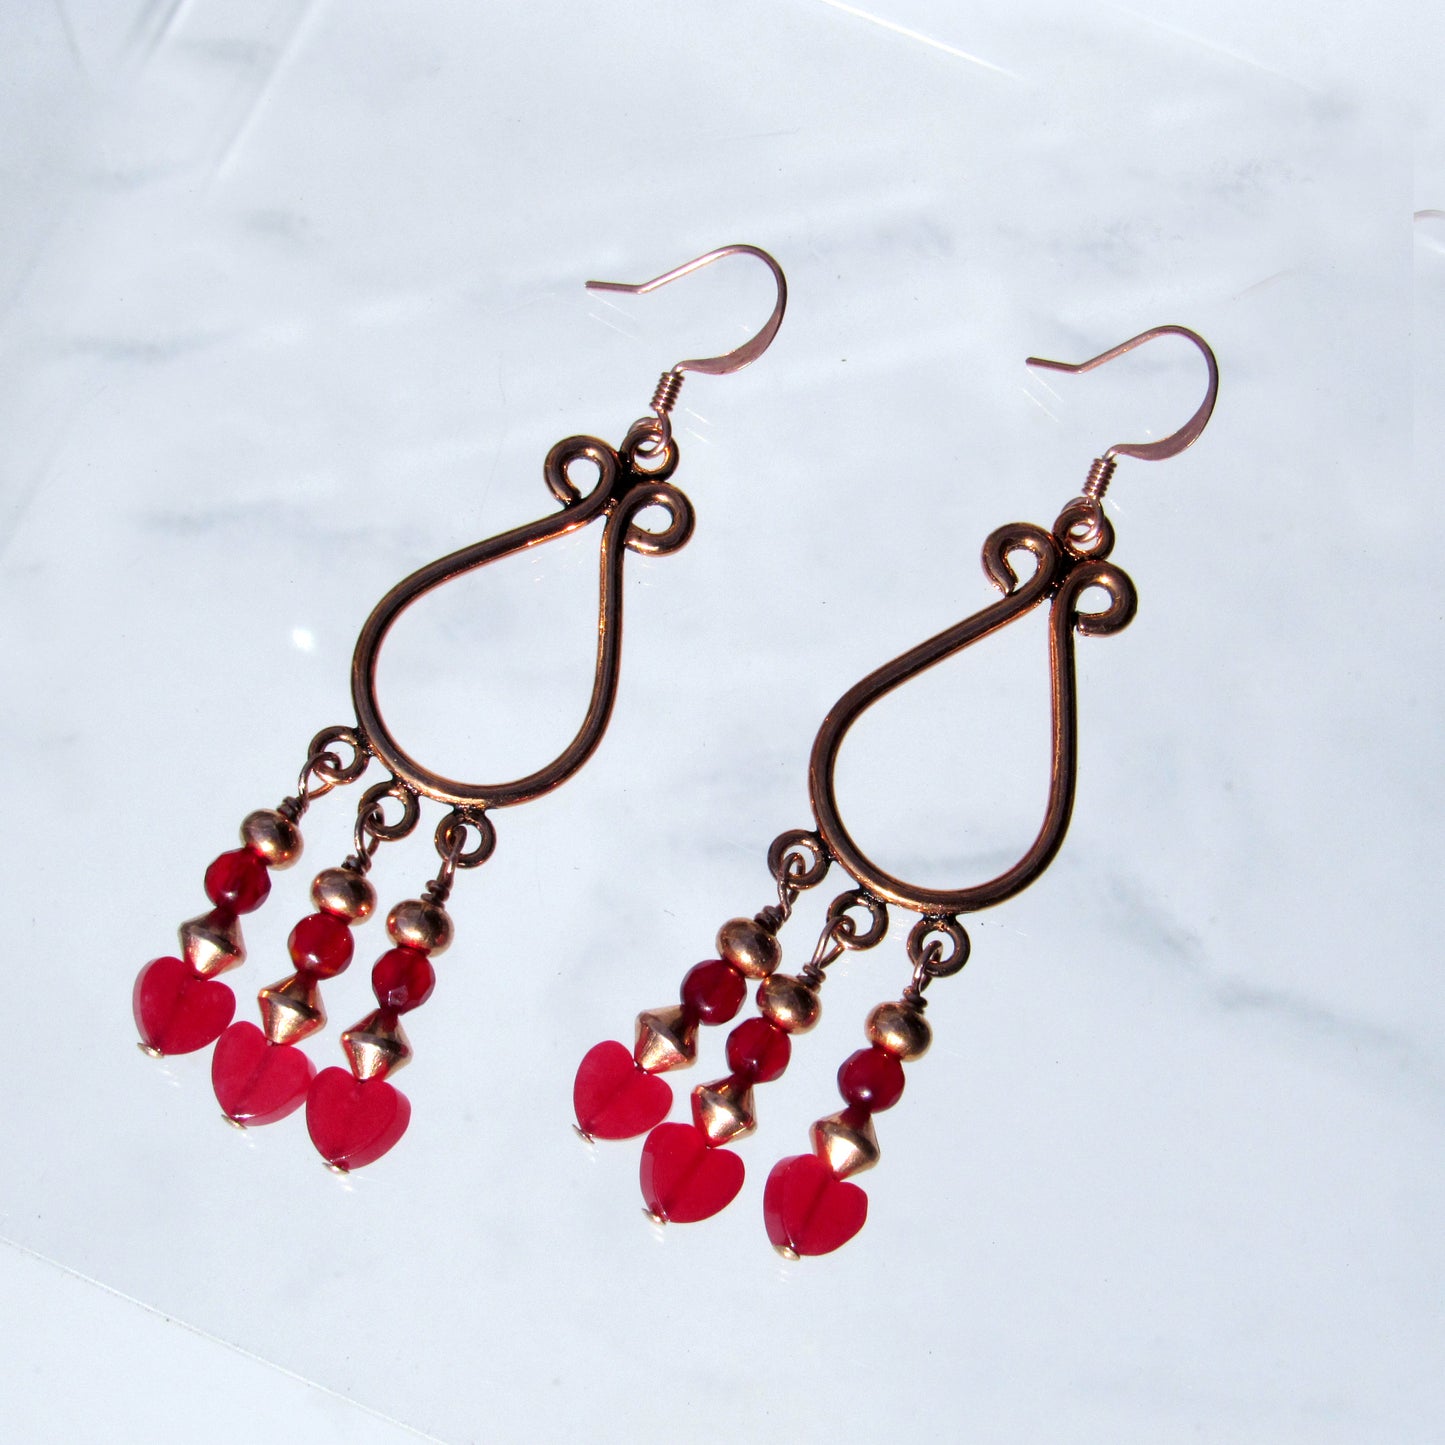 Jade gemstone hearts, Red agates, and copper chandelier earrings